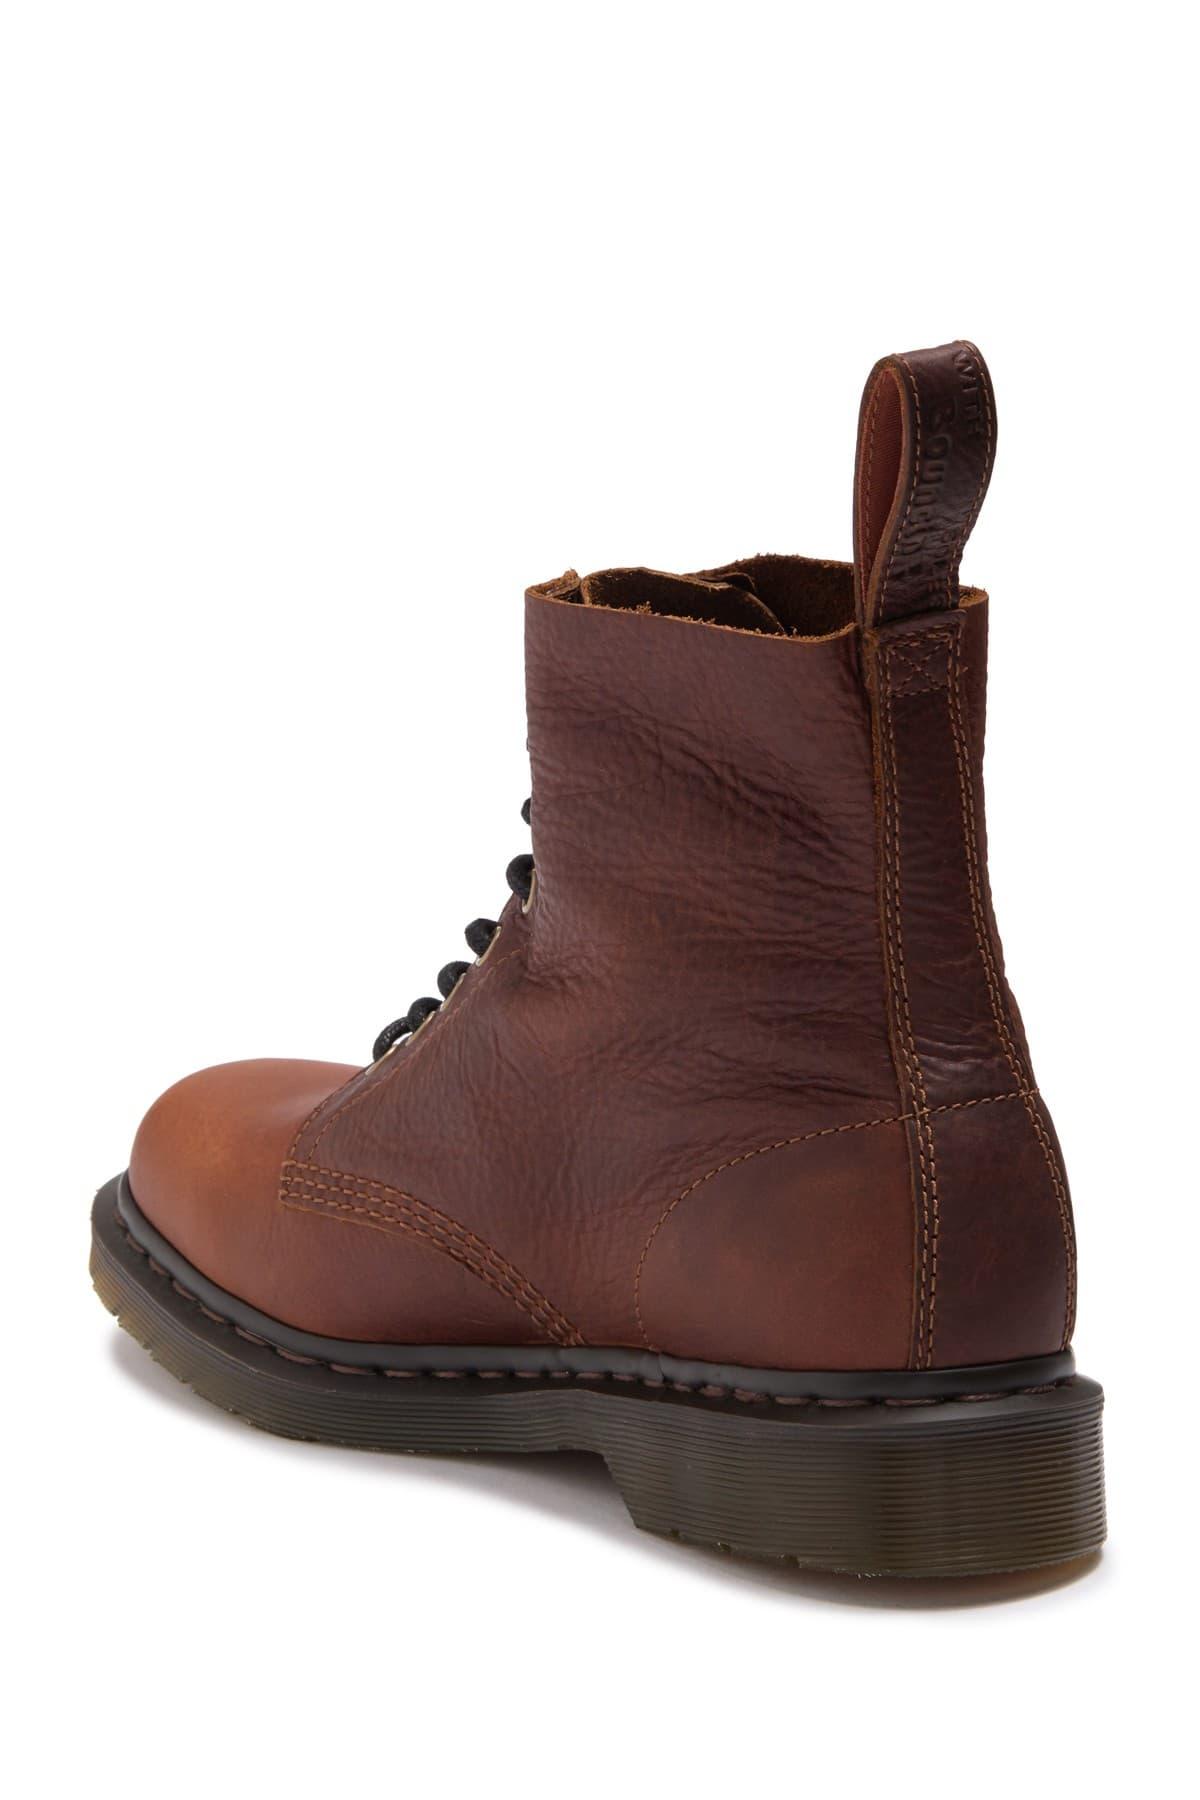 Dr. Martens Leather 1460 Pascal Harvest Boot in Tan (Brown) for Men - Lyst